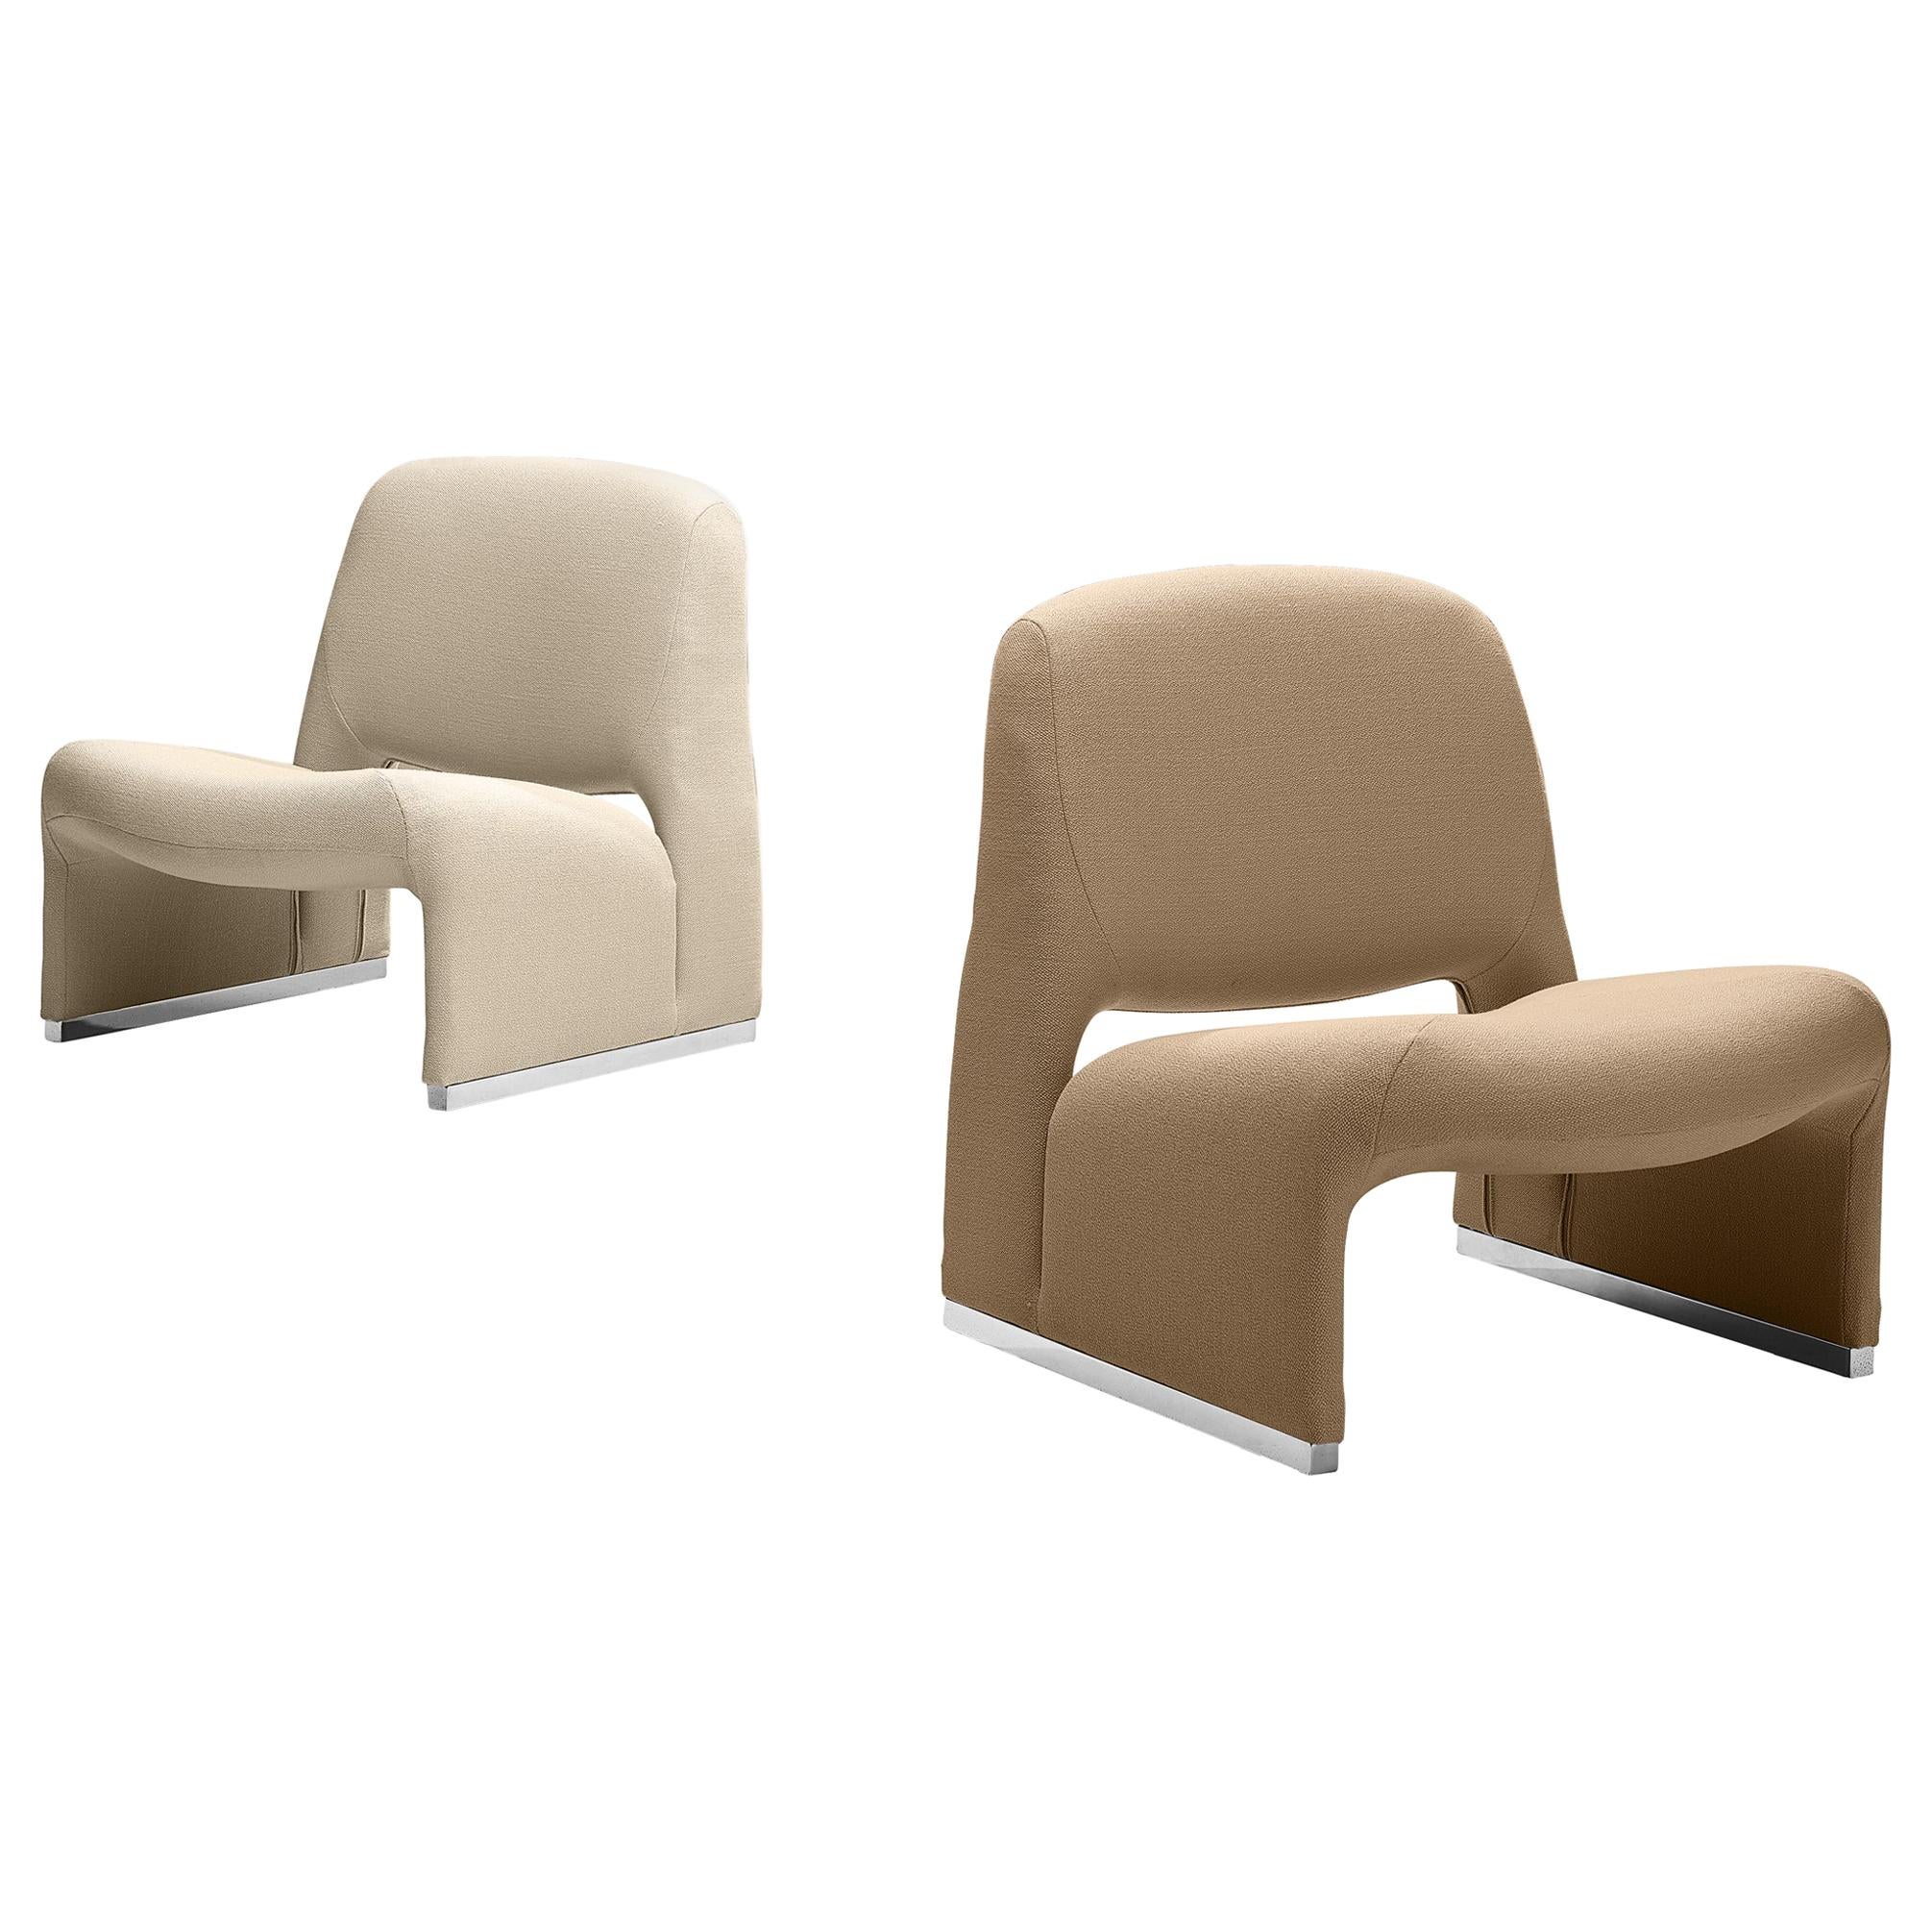 Giancarlo Piretti 'Arki' Pair of Bicolor Easy Chairs in Fabric Upholstery